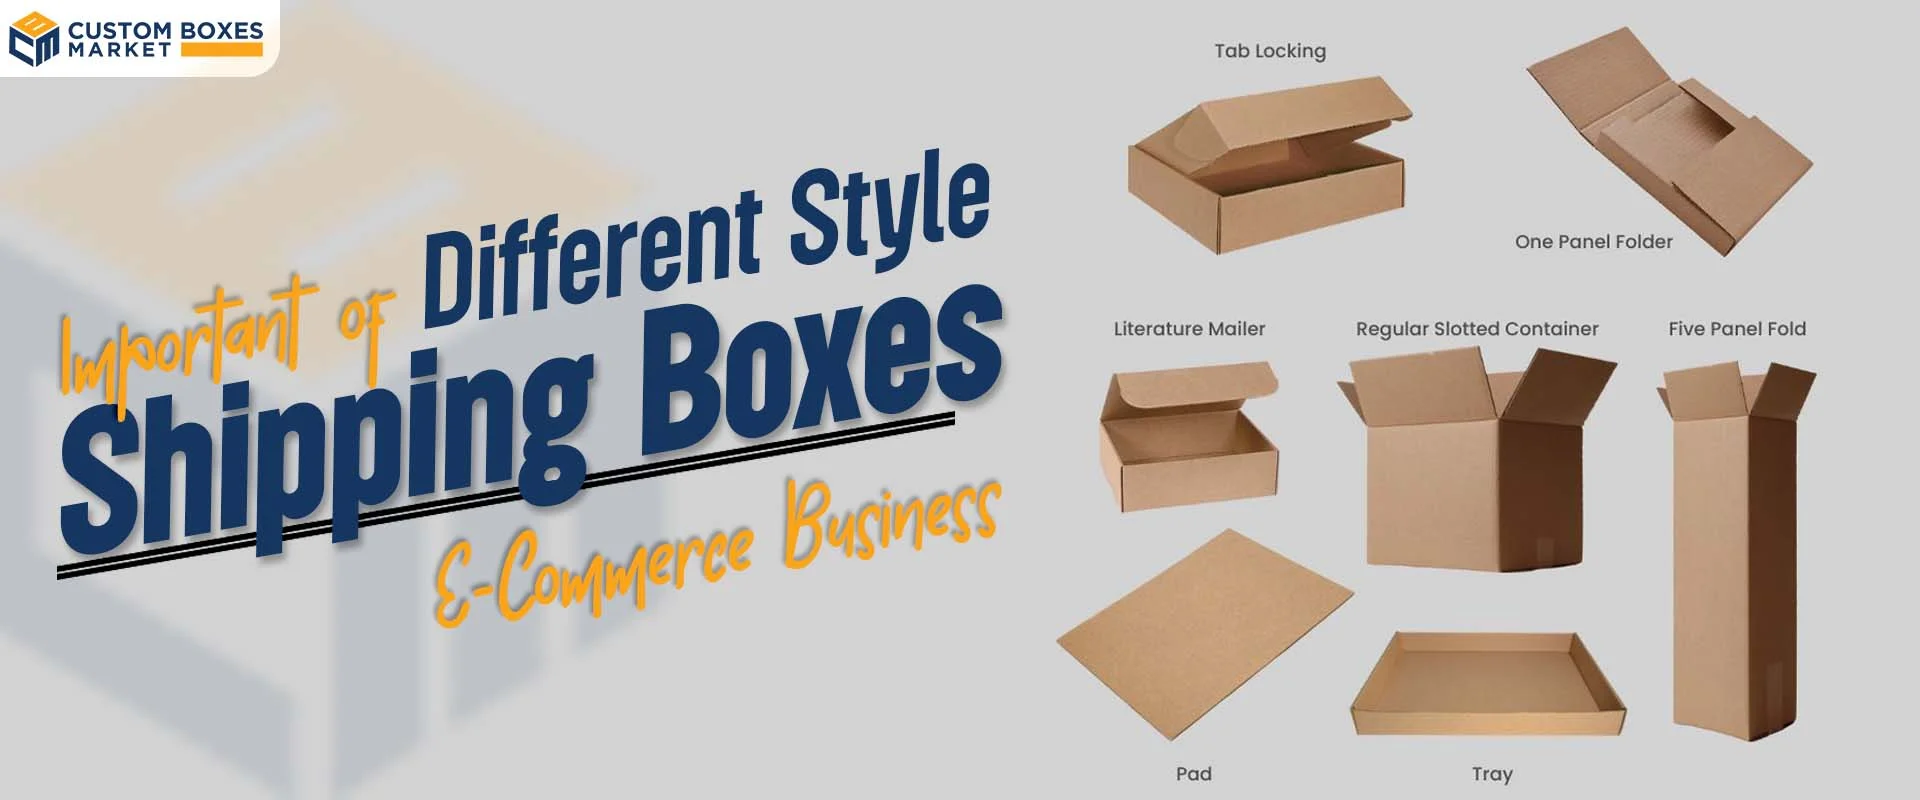 Importance Of Different Style Shipping Boxes E-Commerce Business